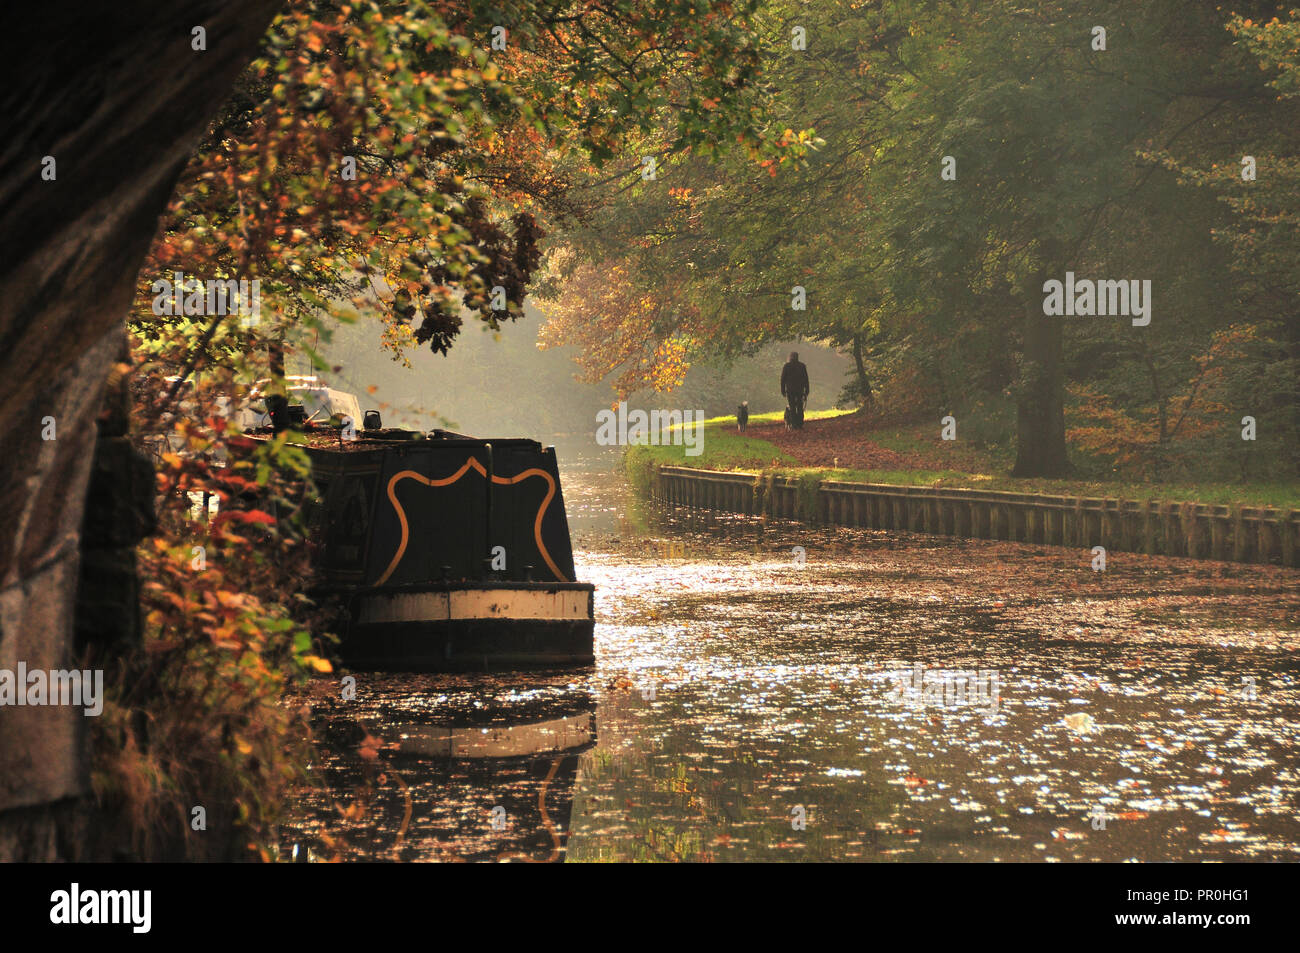 Around the UK - A man & his dog walking along the Leeds Liverpool Canal in Autumn Stock Photo